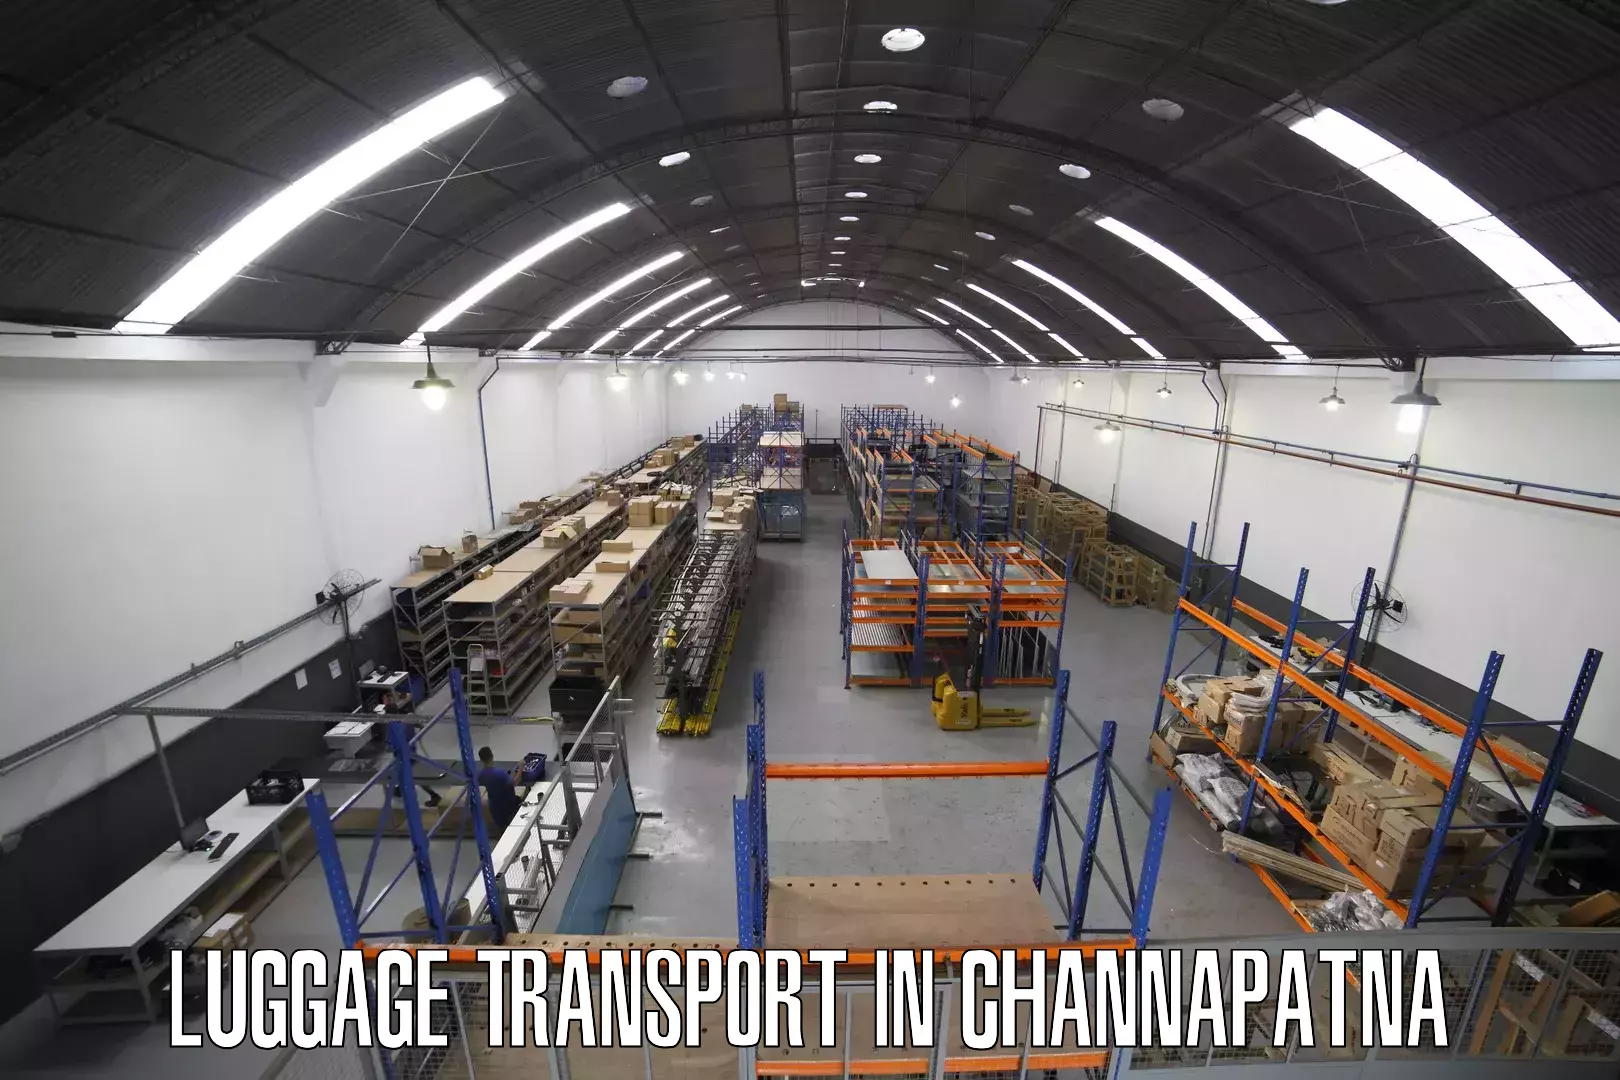 Luggage transport consulting in Channapatna